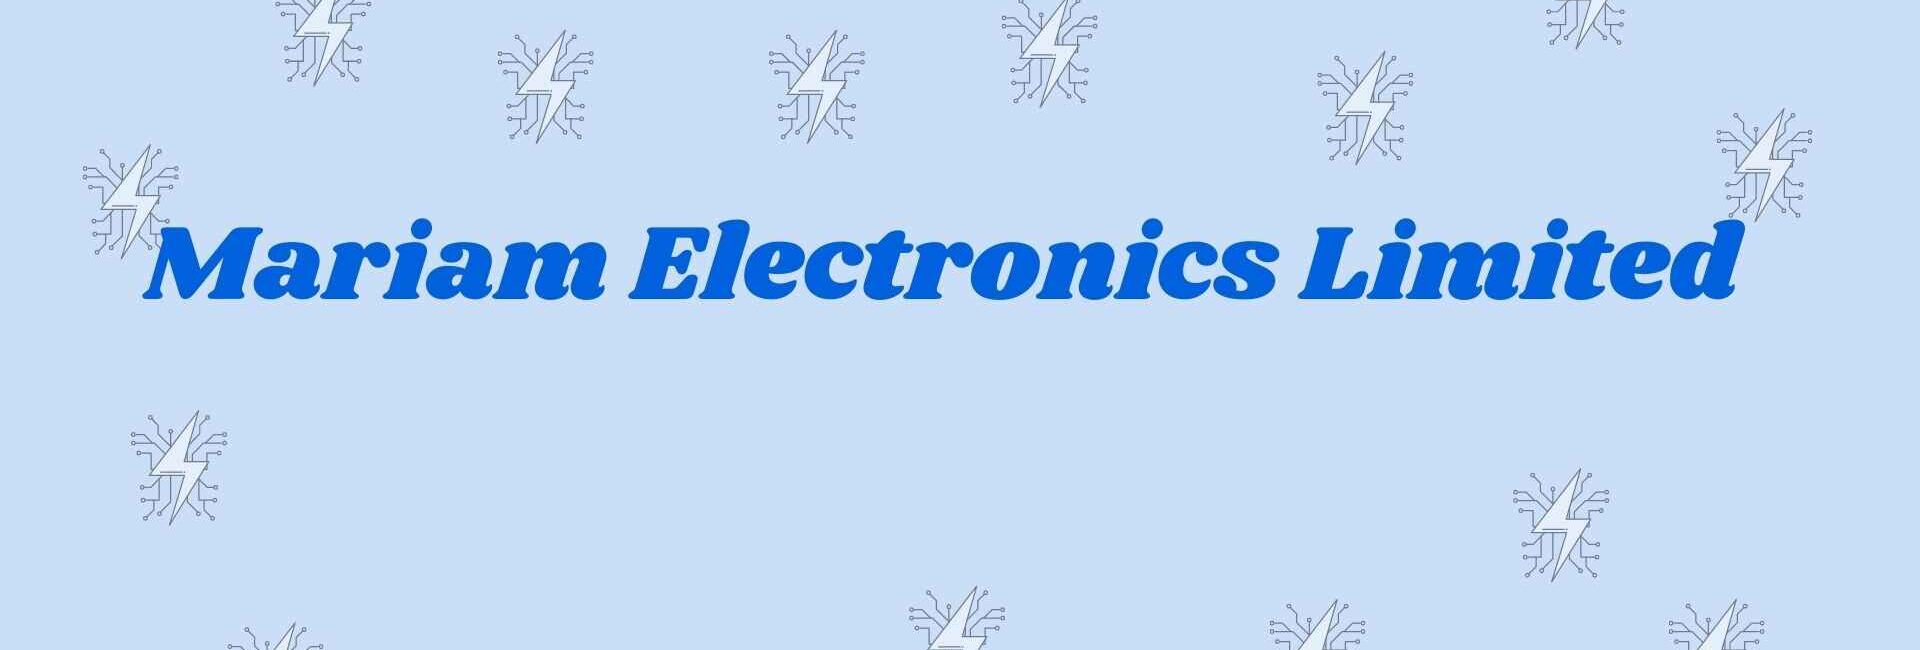 Mariam Electronics Limited - Electronics Goods Dealer in Noida